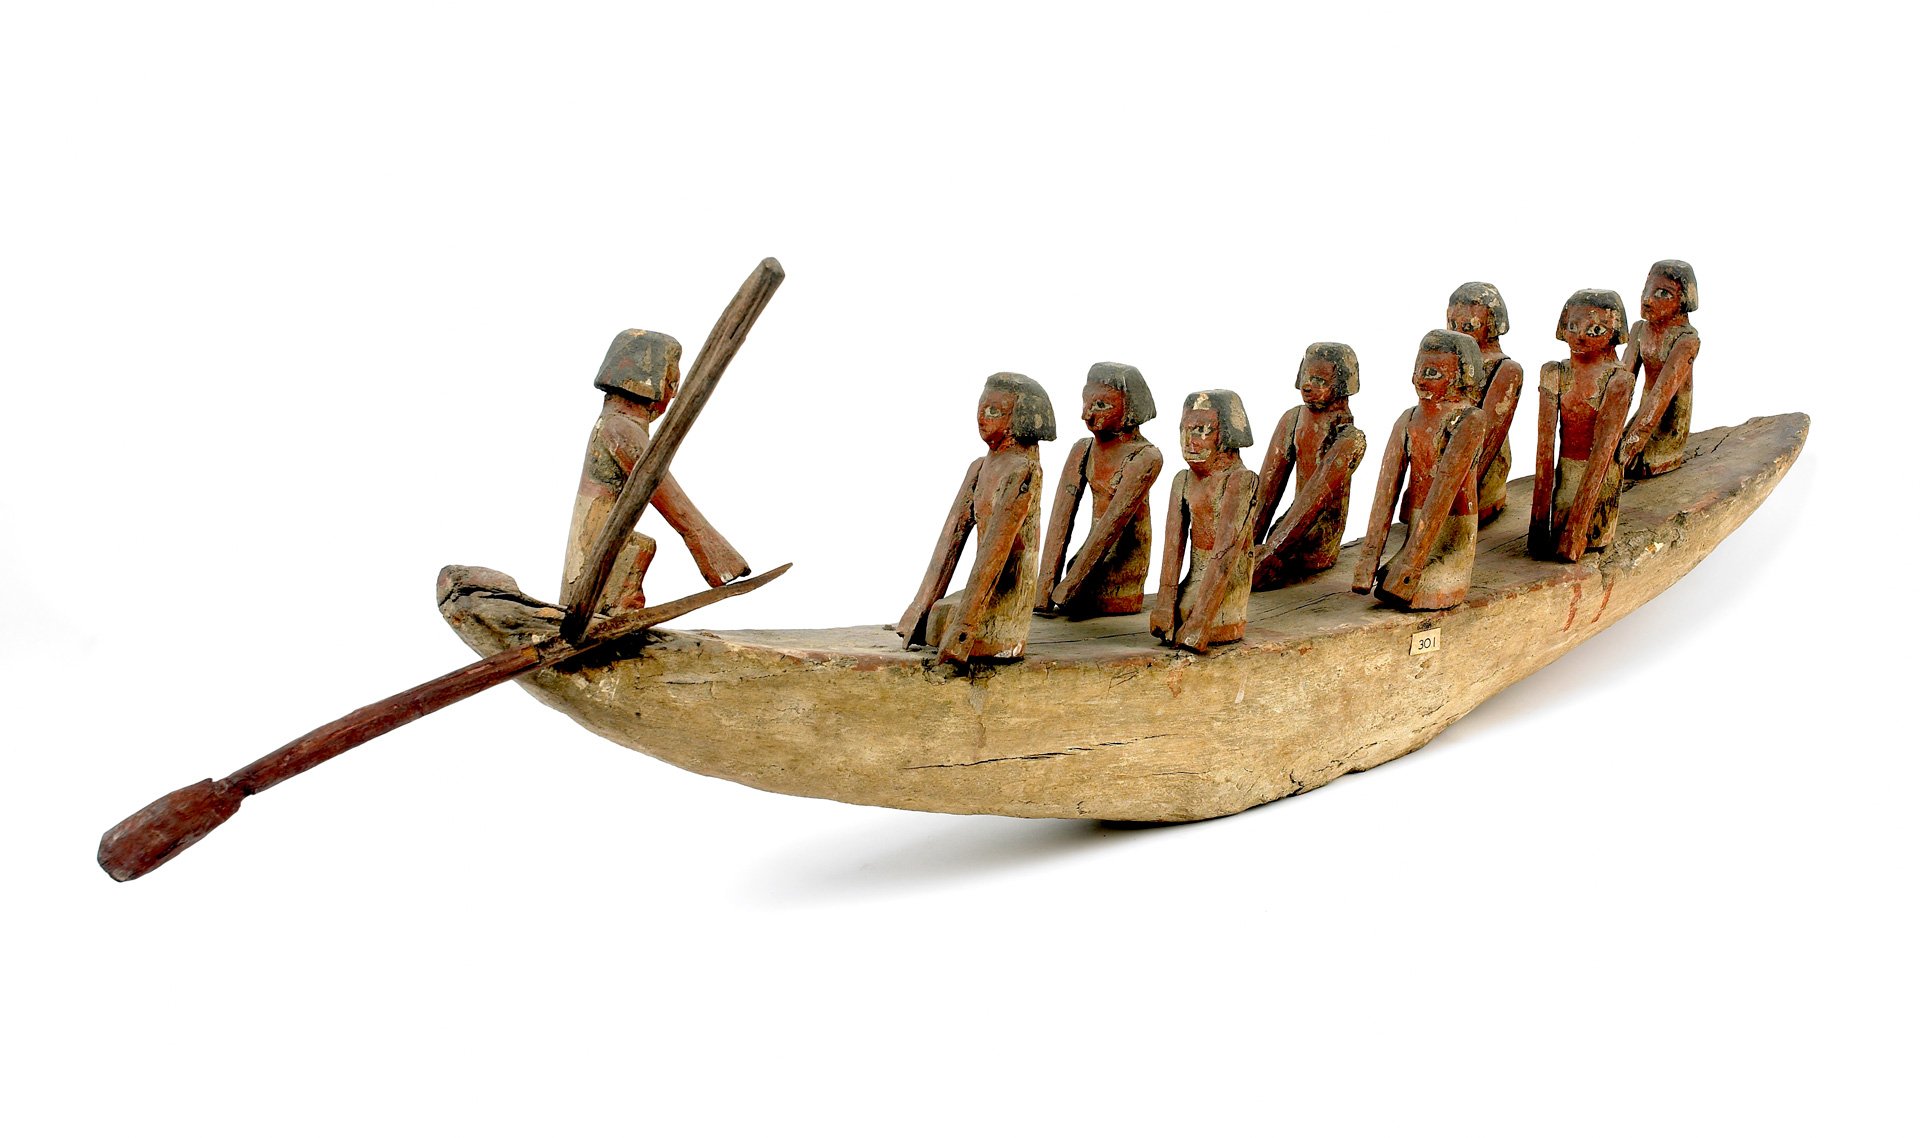 A wooden model of a boat with carved figures on it